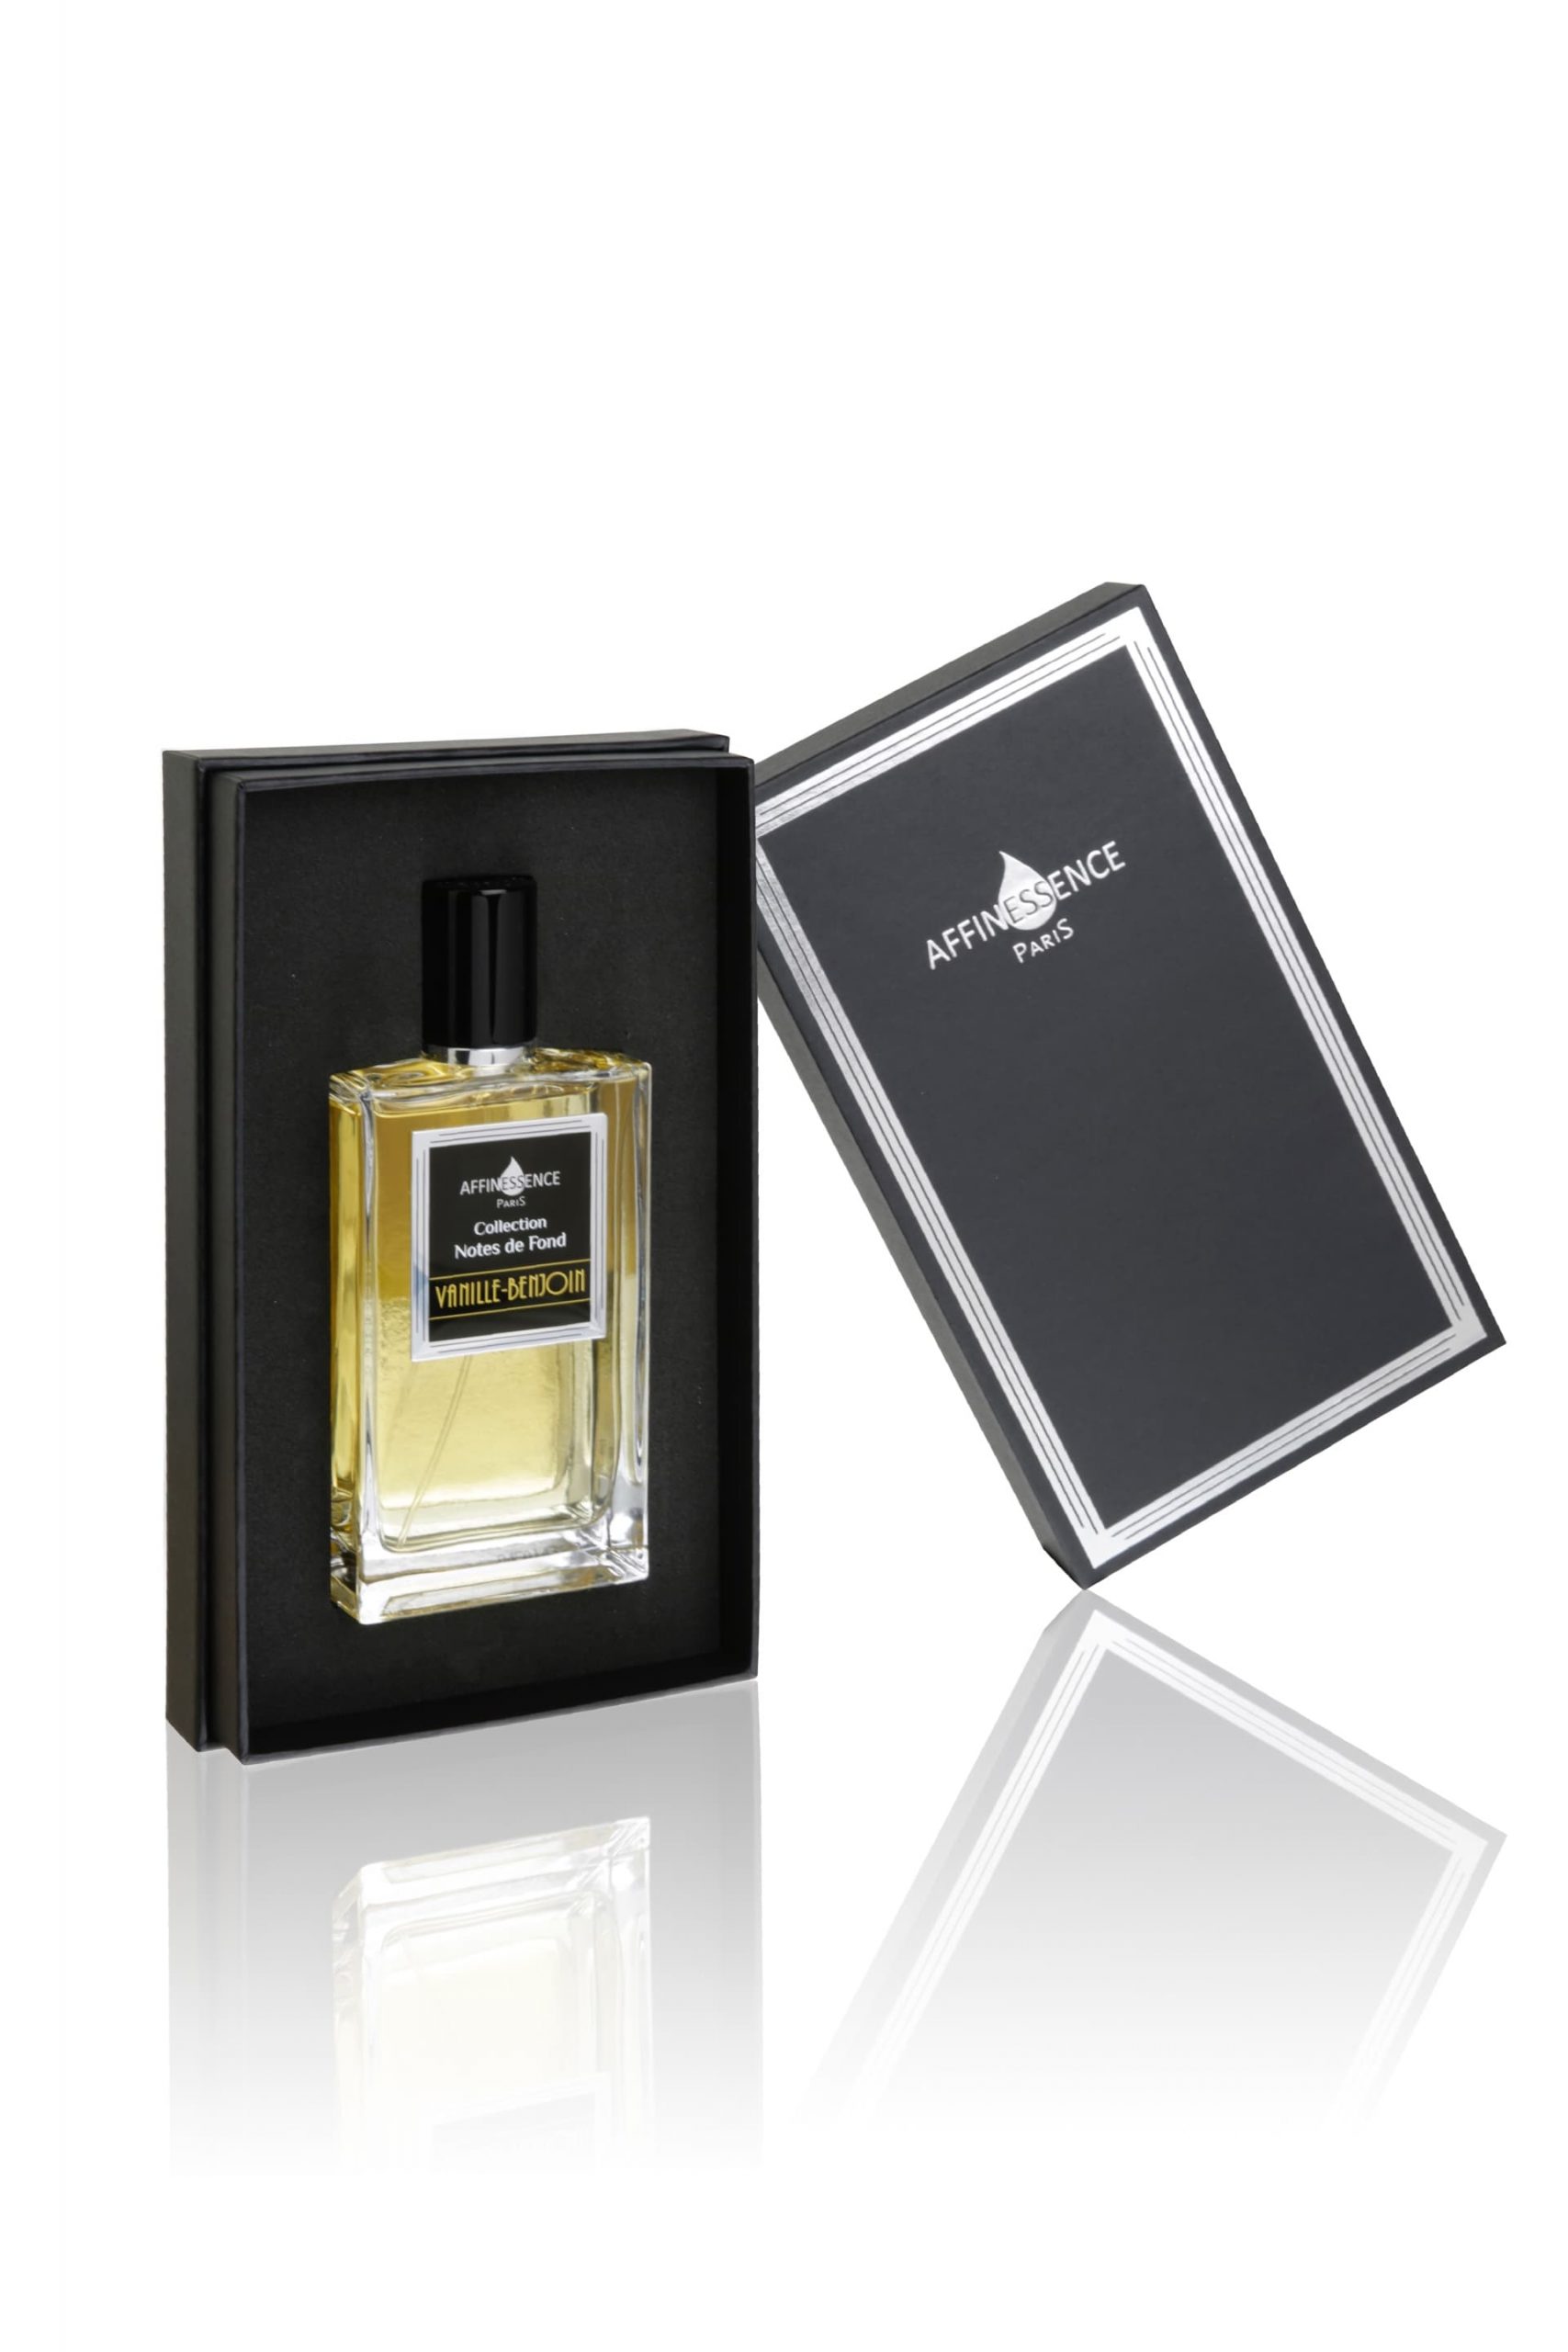 100ml-vanille-benjoin-classic-affinessence-scaled-1-1.jpg